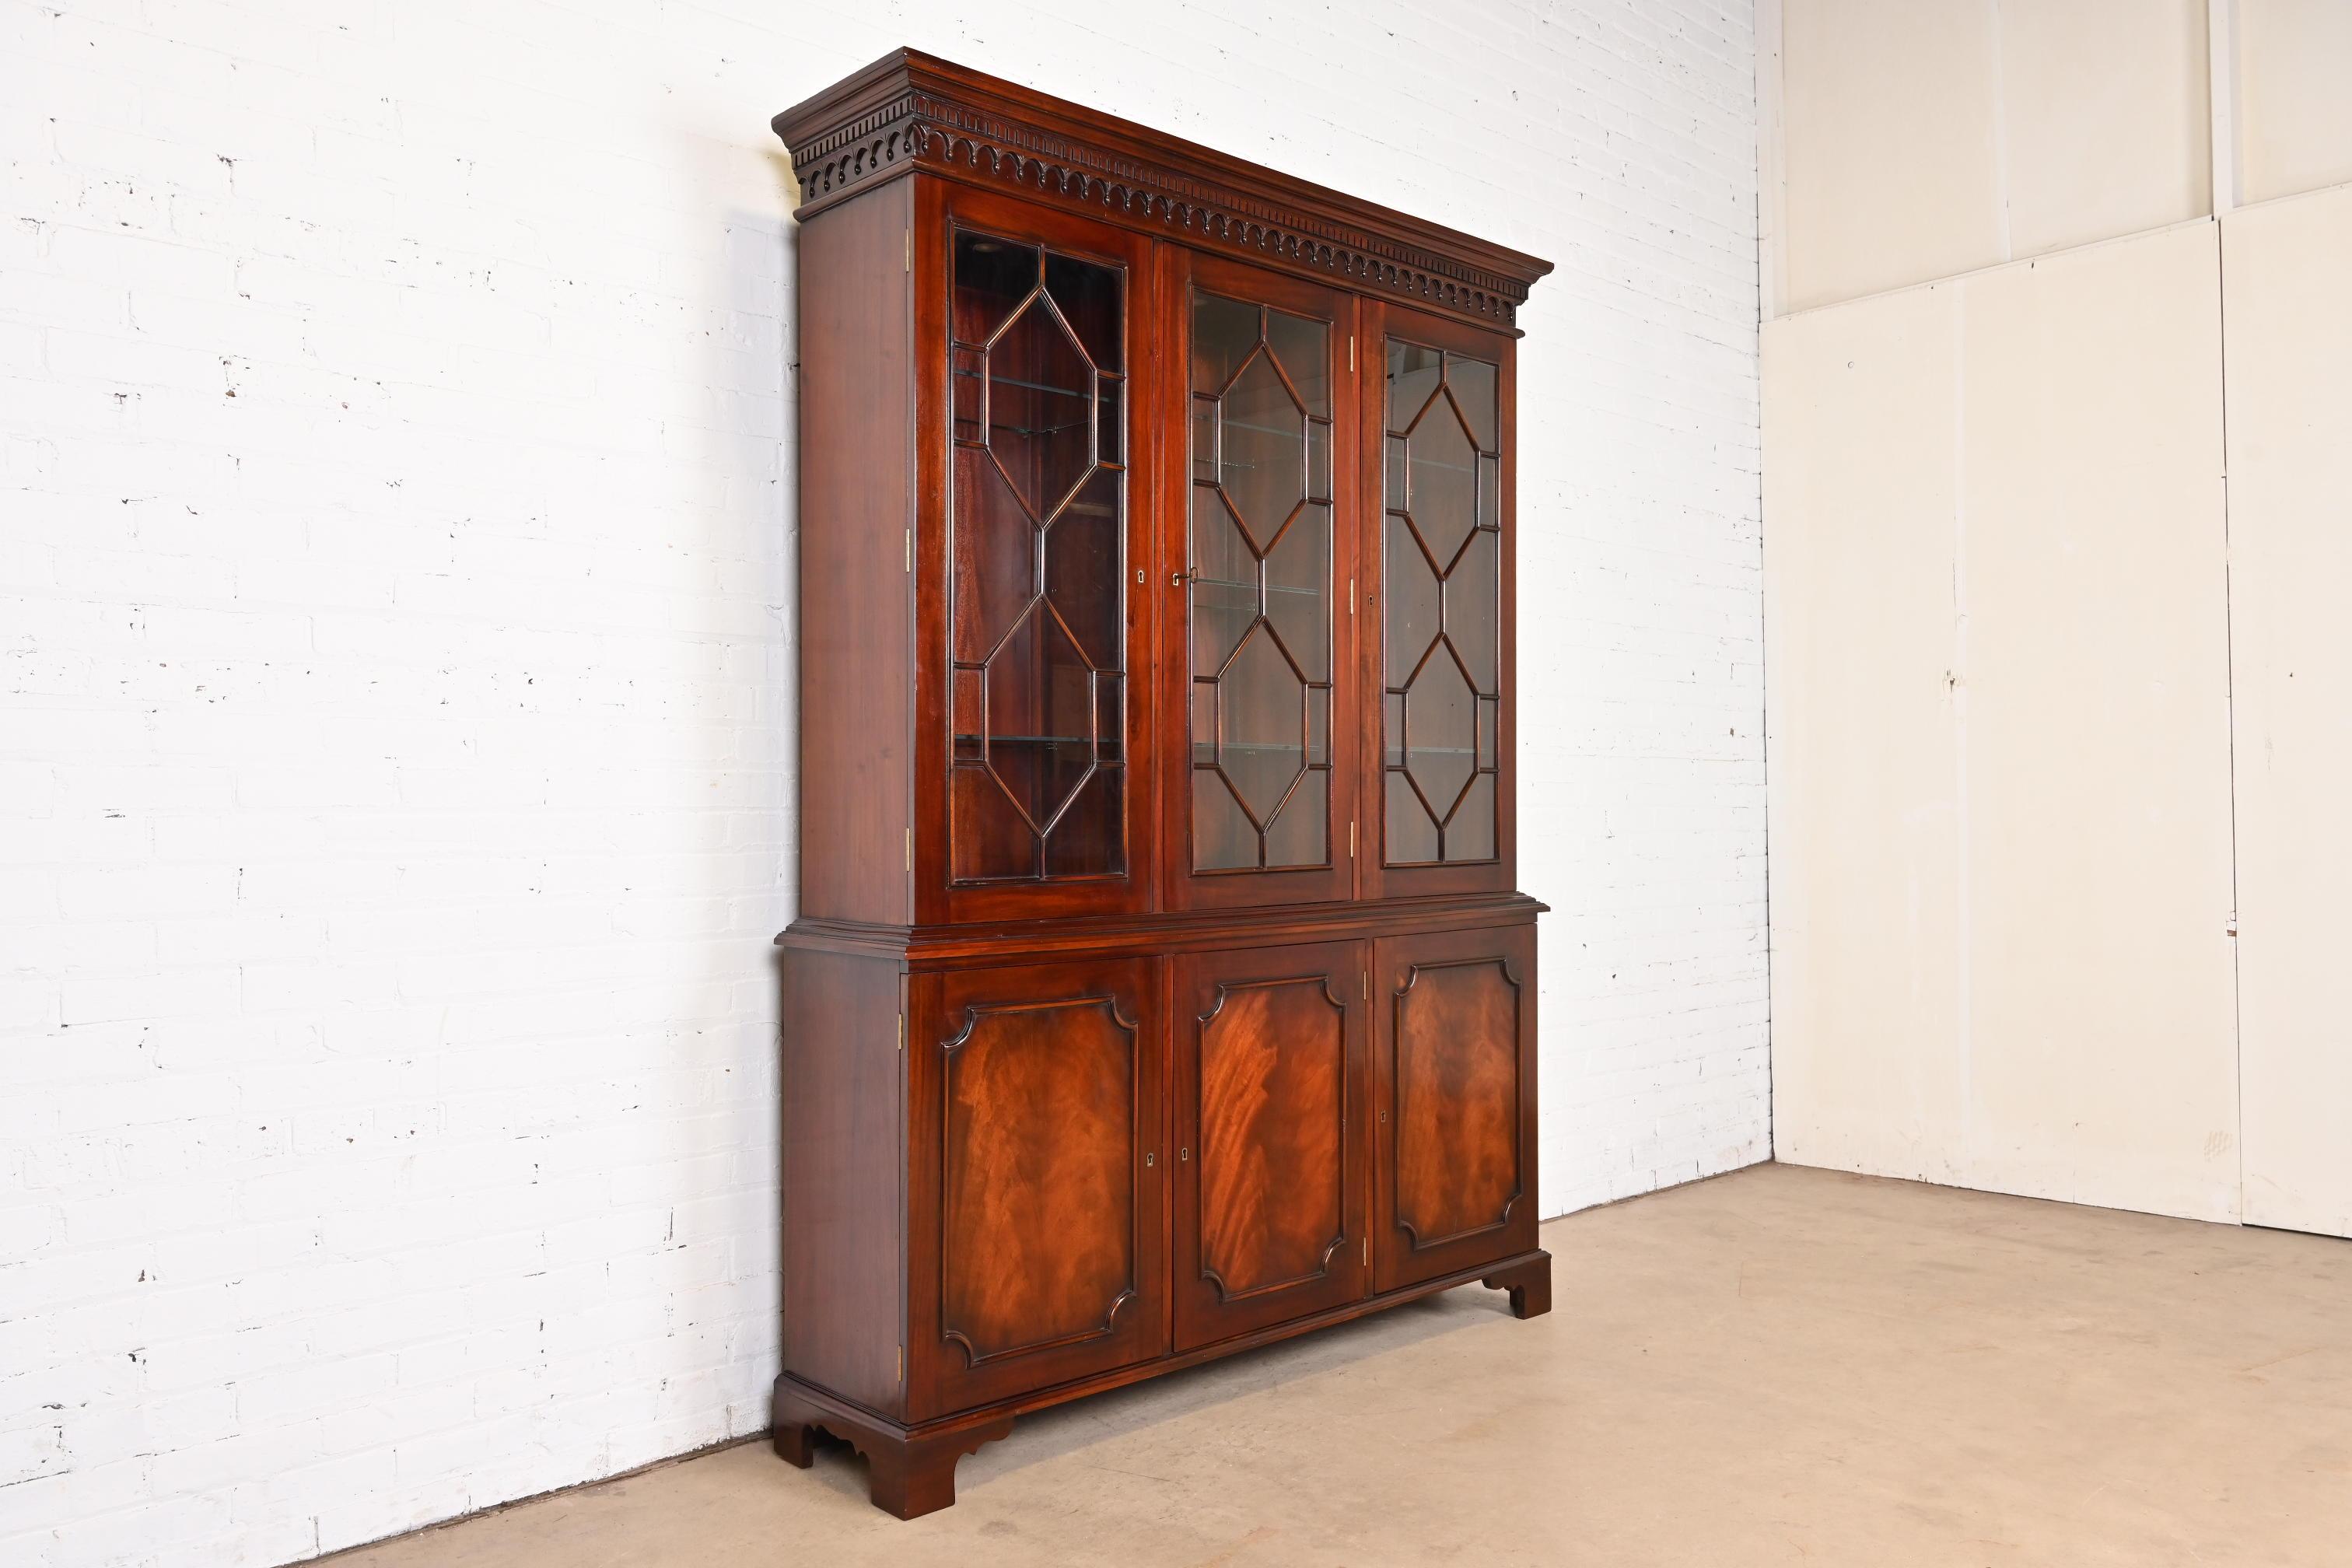 Baker Furniture Style Georgian Carved Flame Mahogany Breakfront Bookcase Cabinet In Good Condition For Sale In South Bend, IN